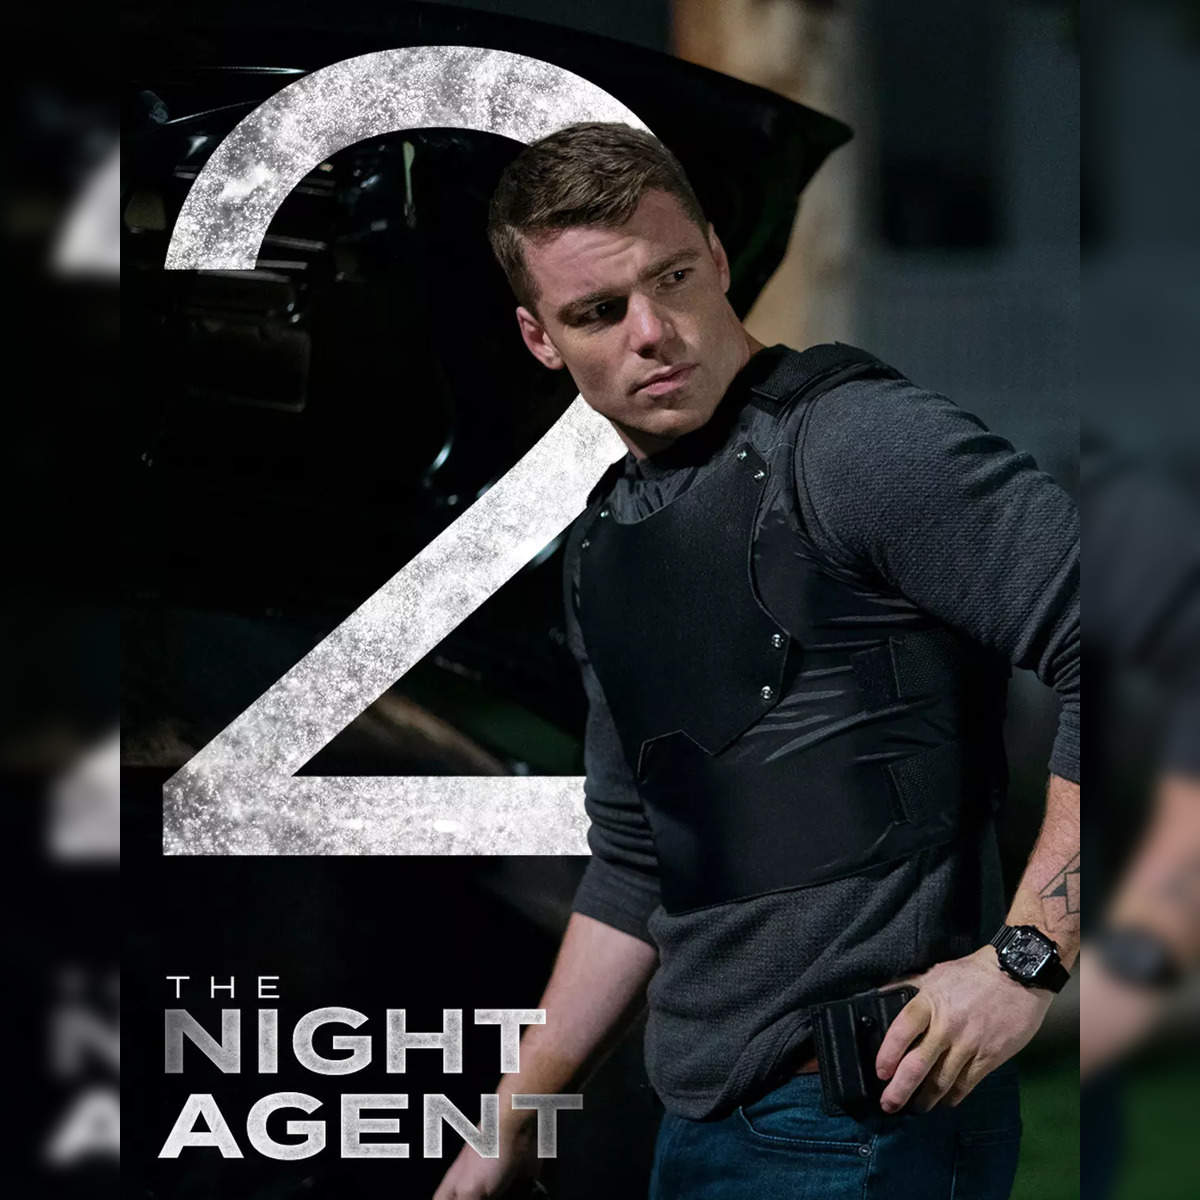 The Night Agent Season 2: The Night Agent Season 2 set to release sooner  than expected? Latest updates and spoilers revealed - The Economic Times